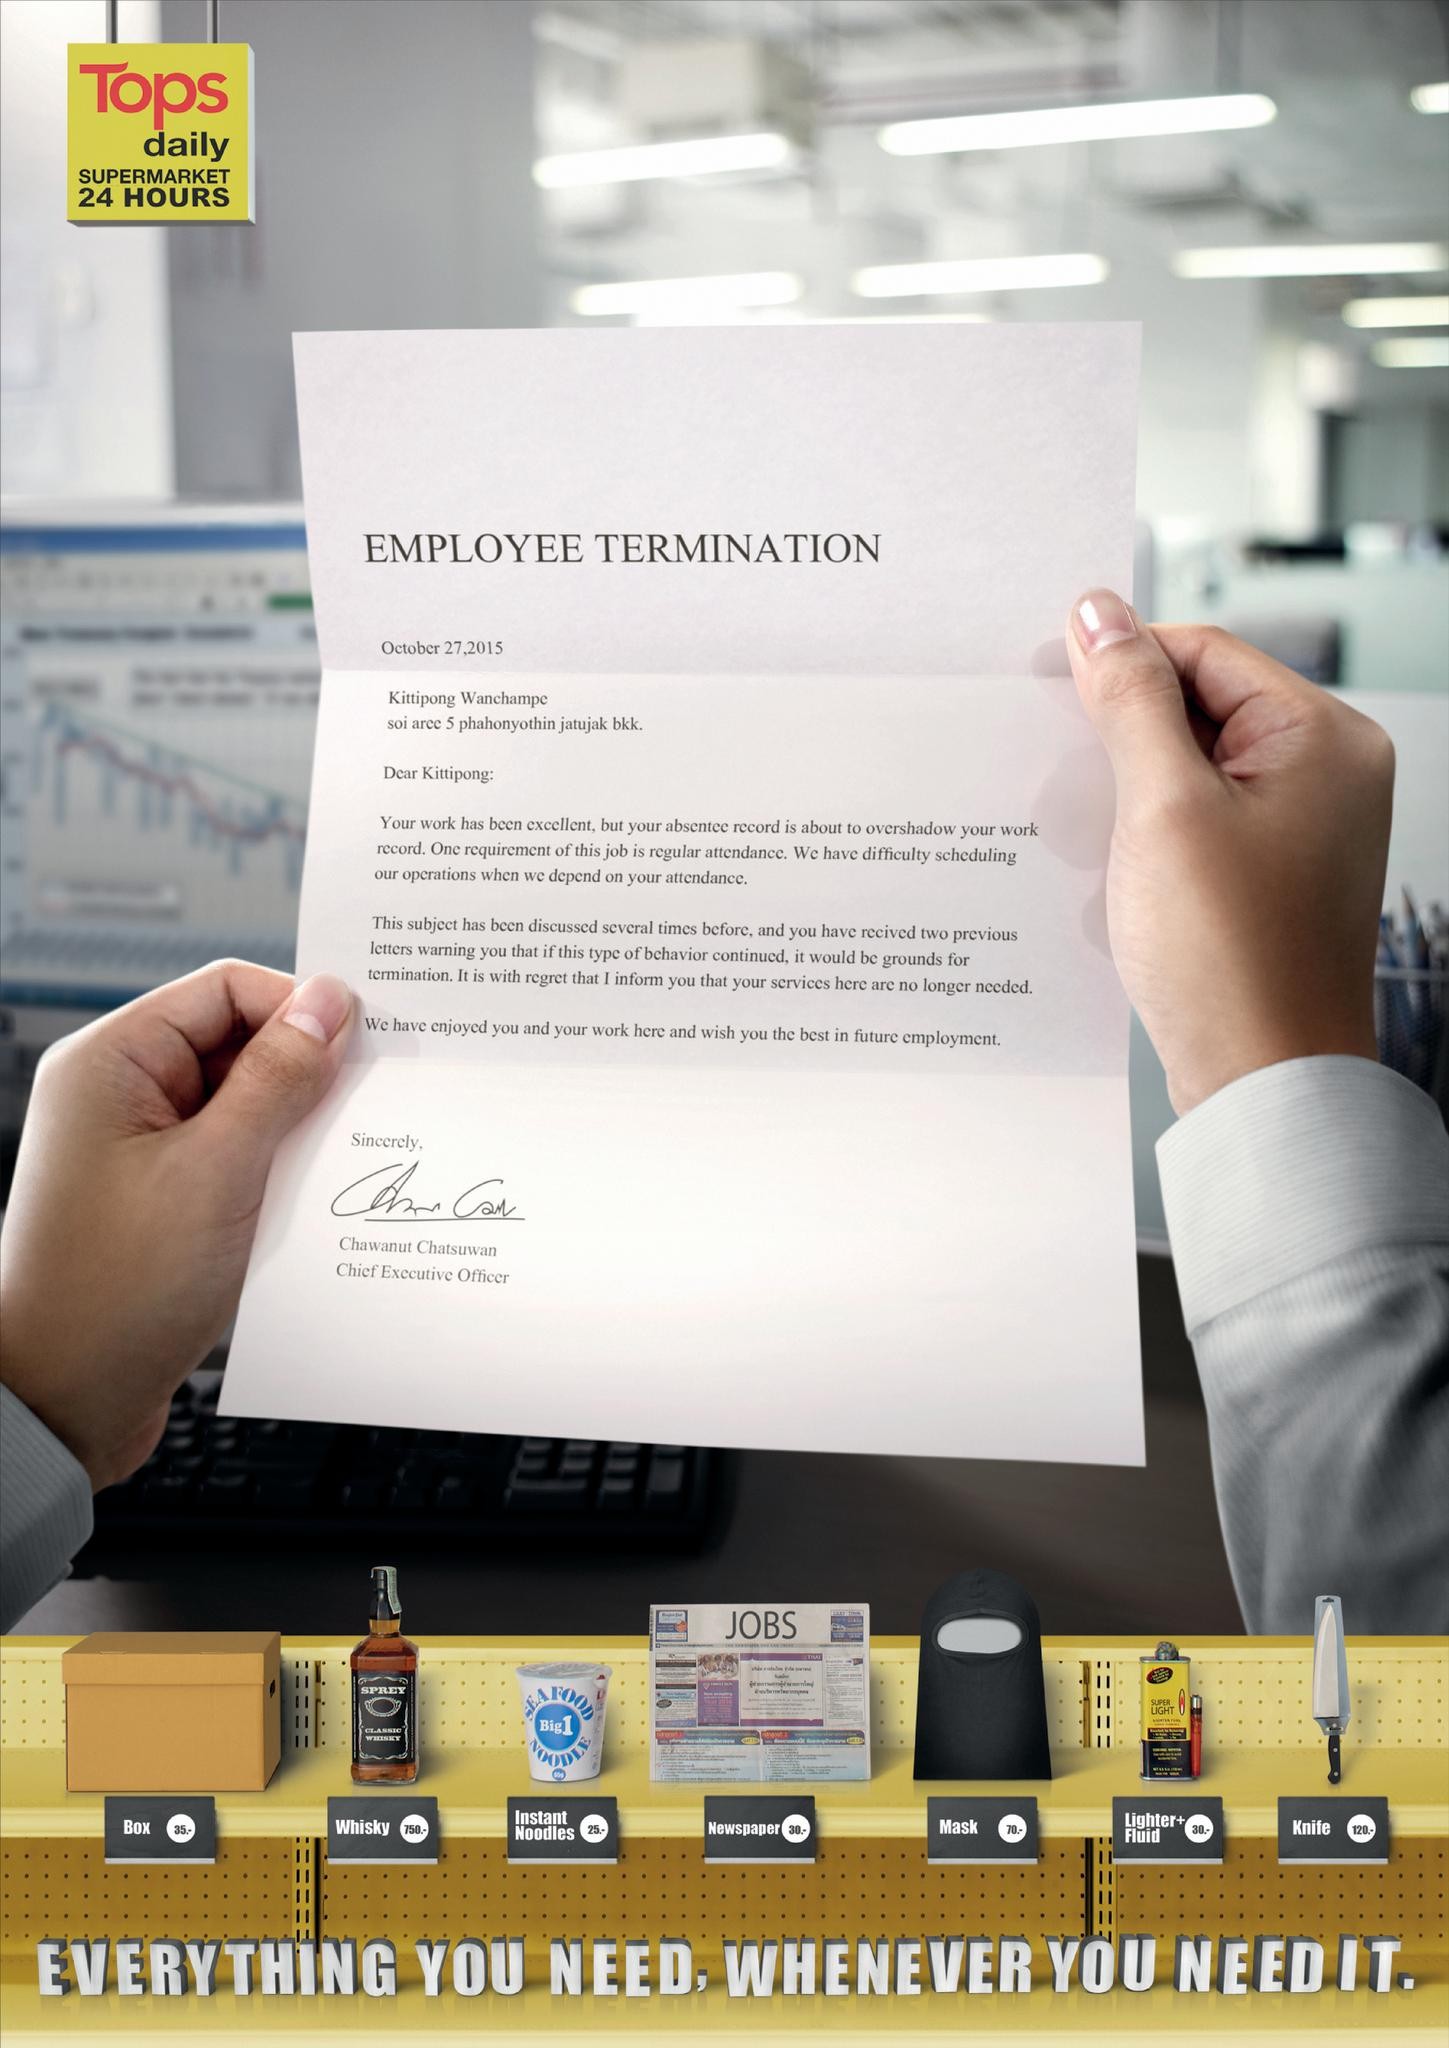 24 hours campaign - Employee Termination